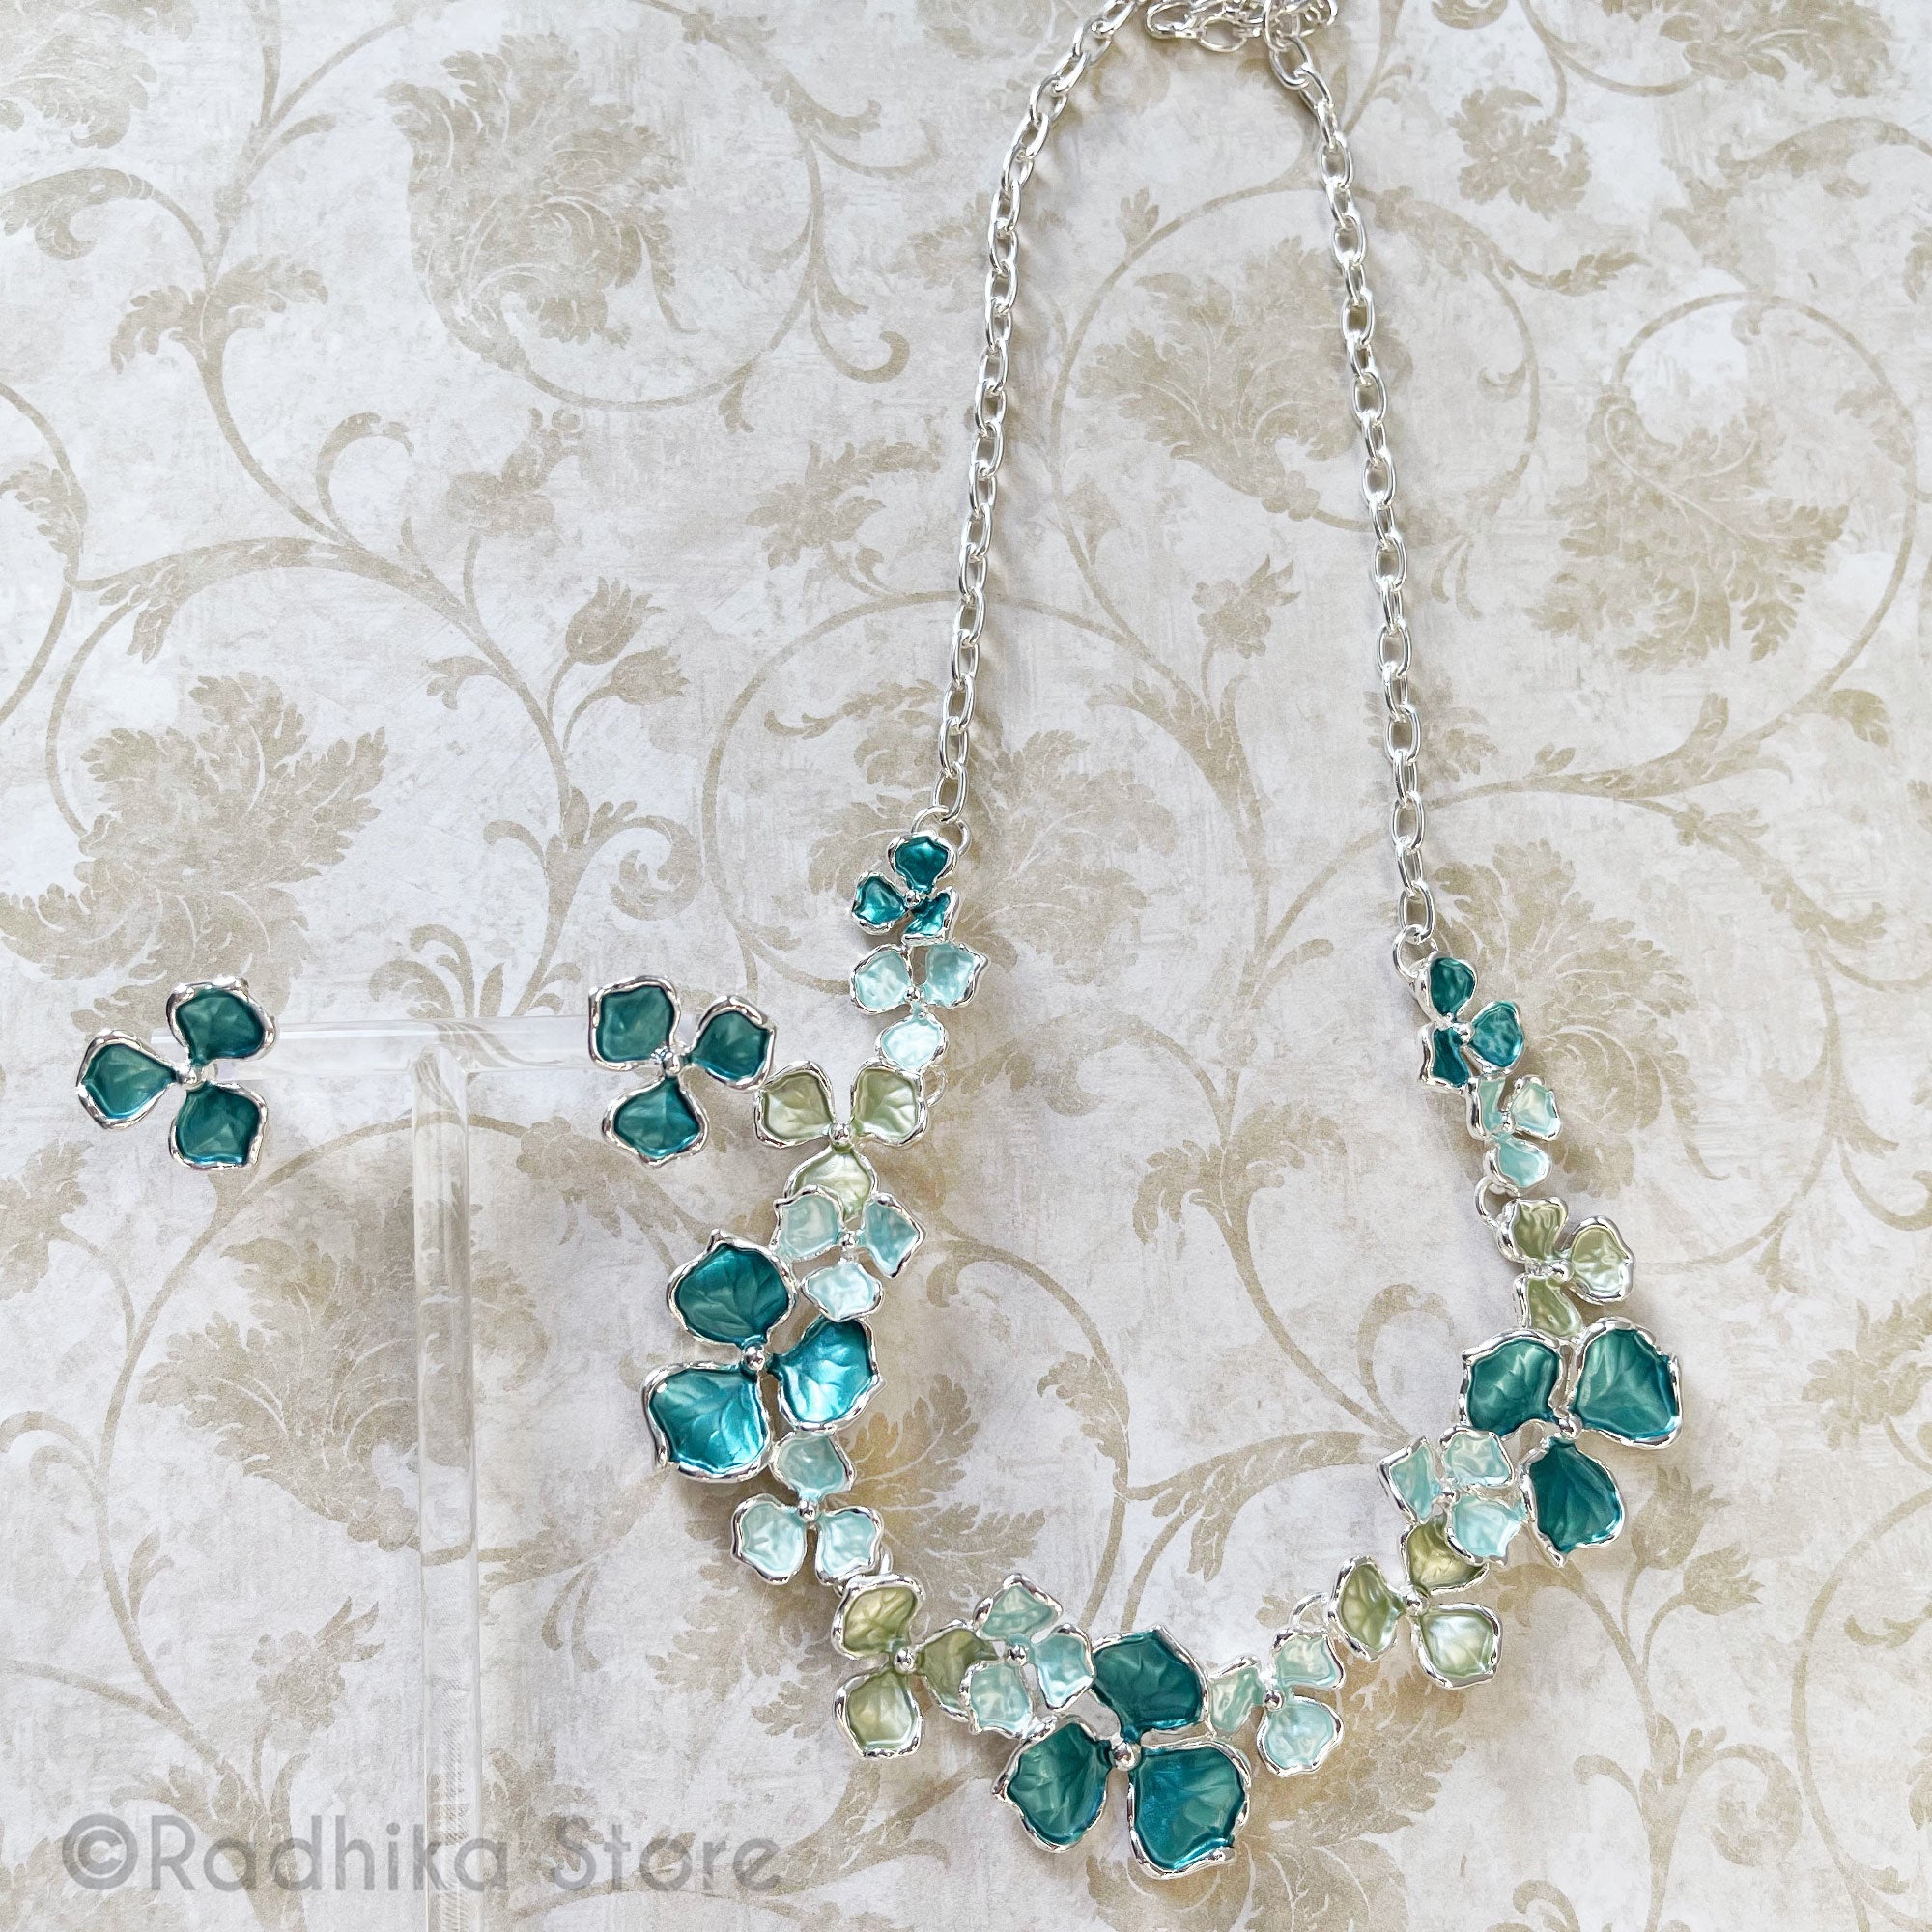 Hydrangea Flowers - Deity Necklace and Earrings Set -  Teal With Silver Color